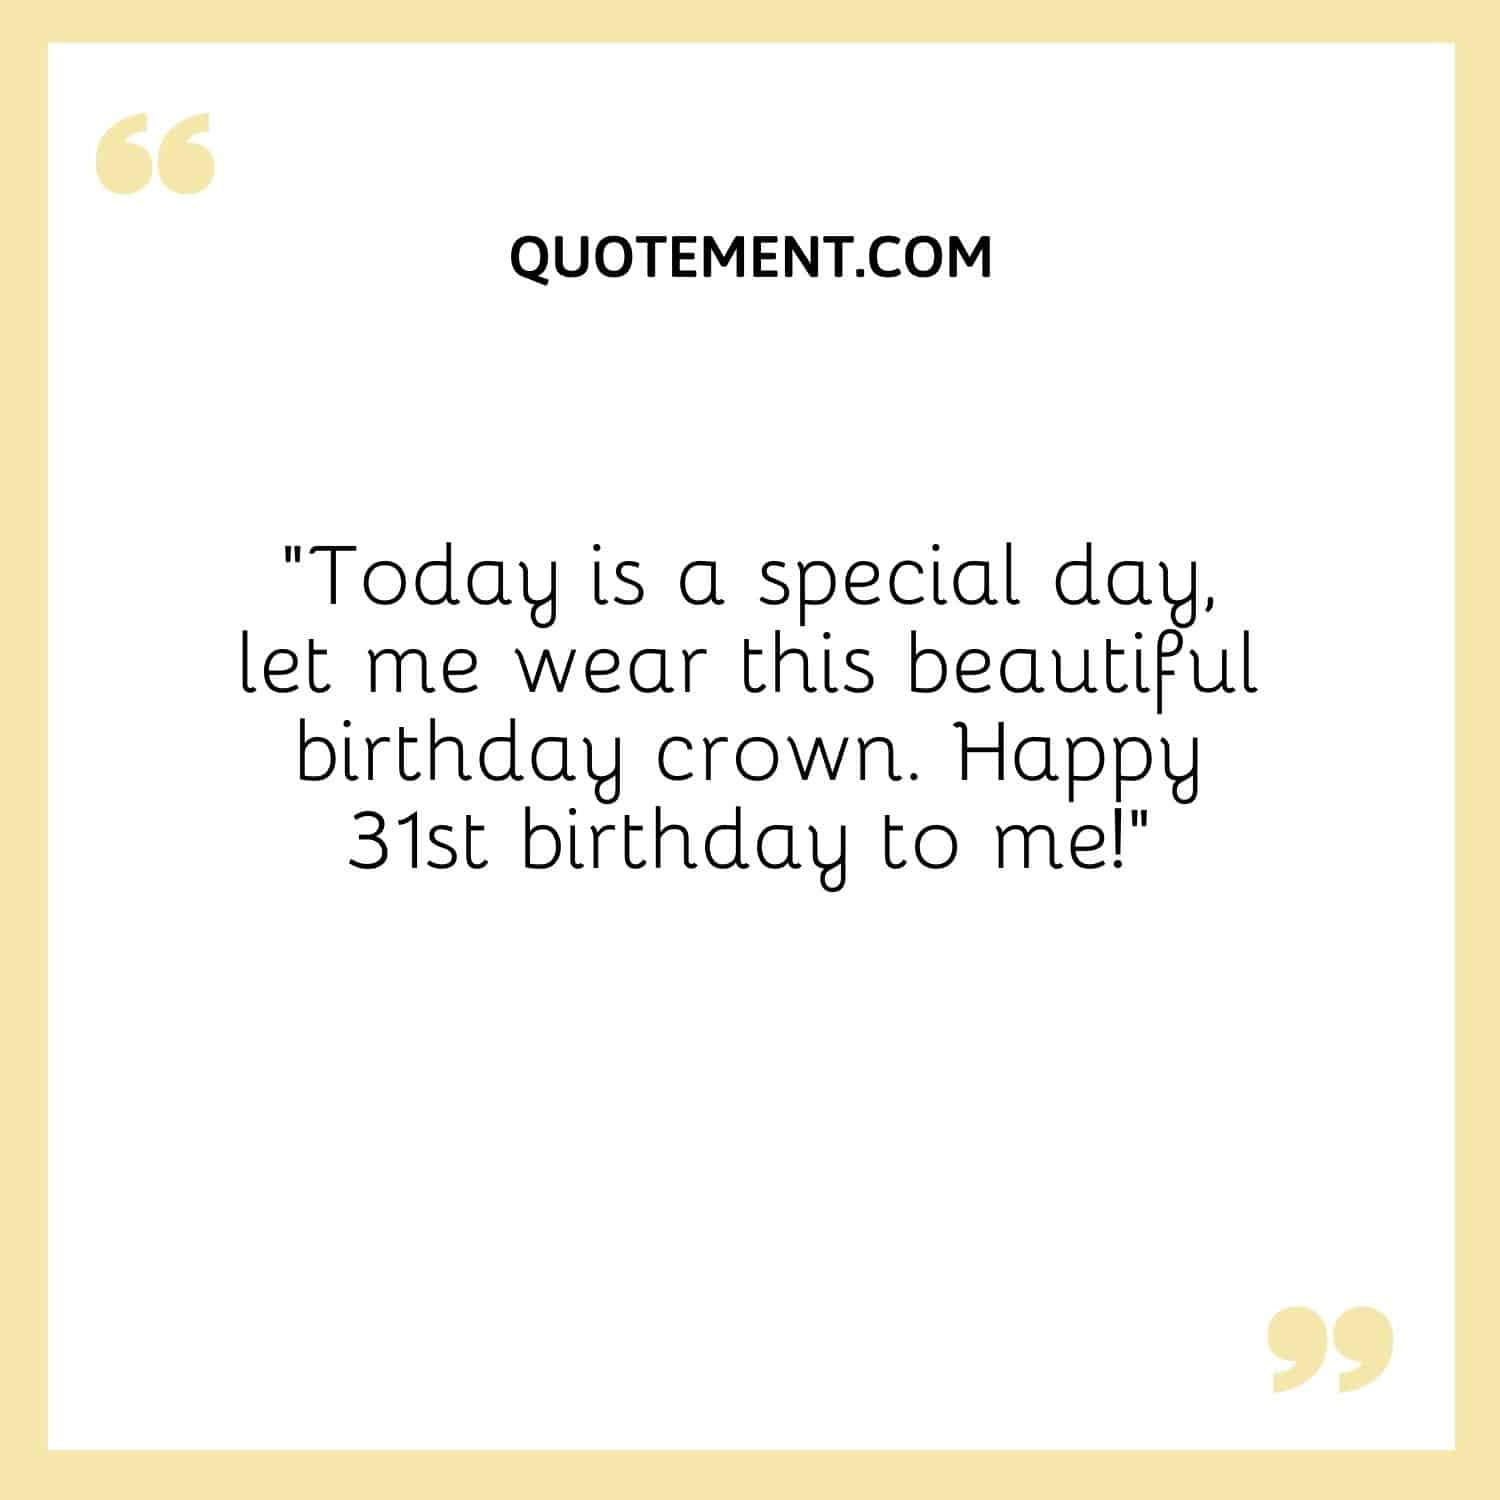 Today is a special day, let me wear this beautiful birthday crown.